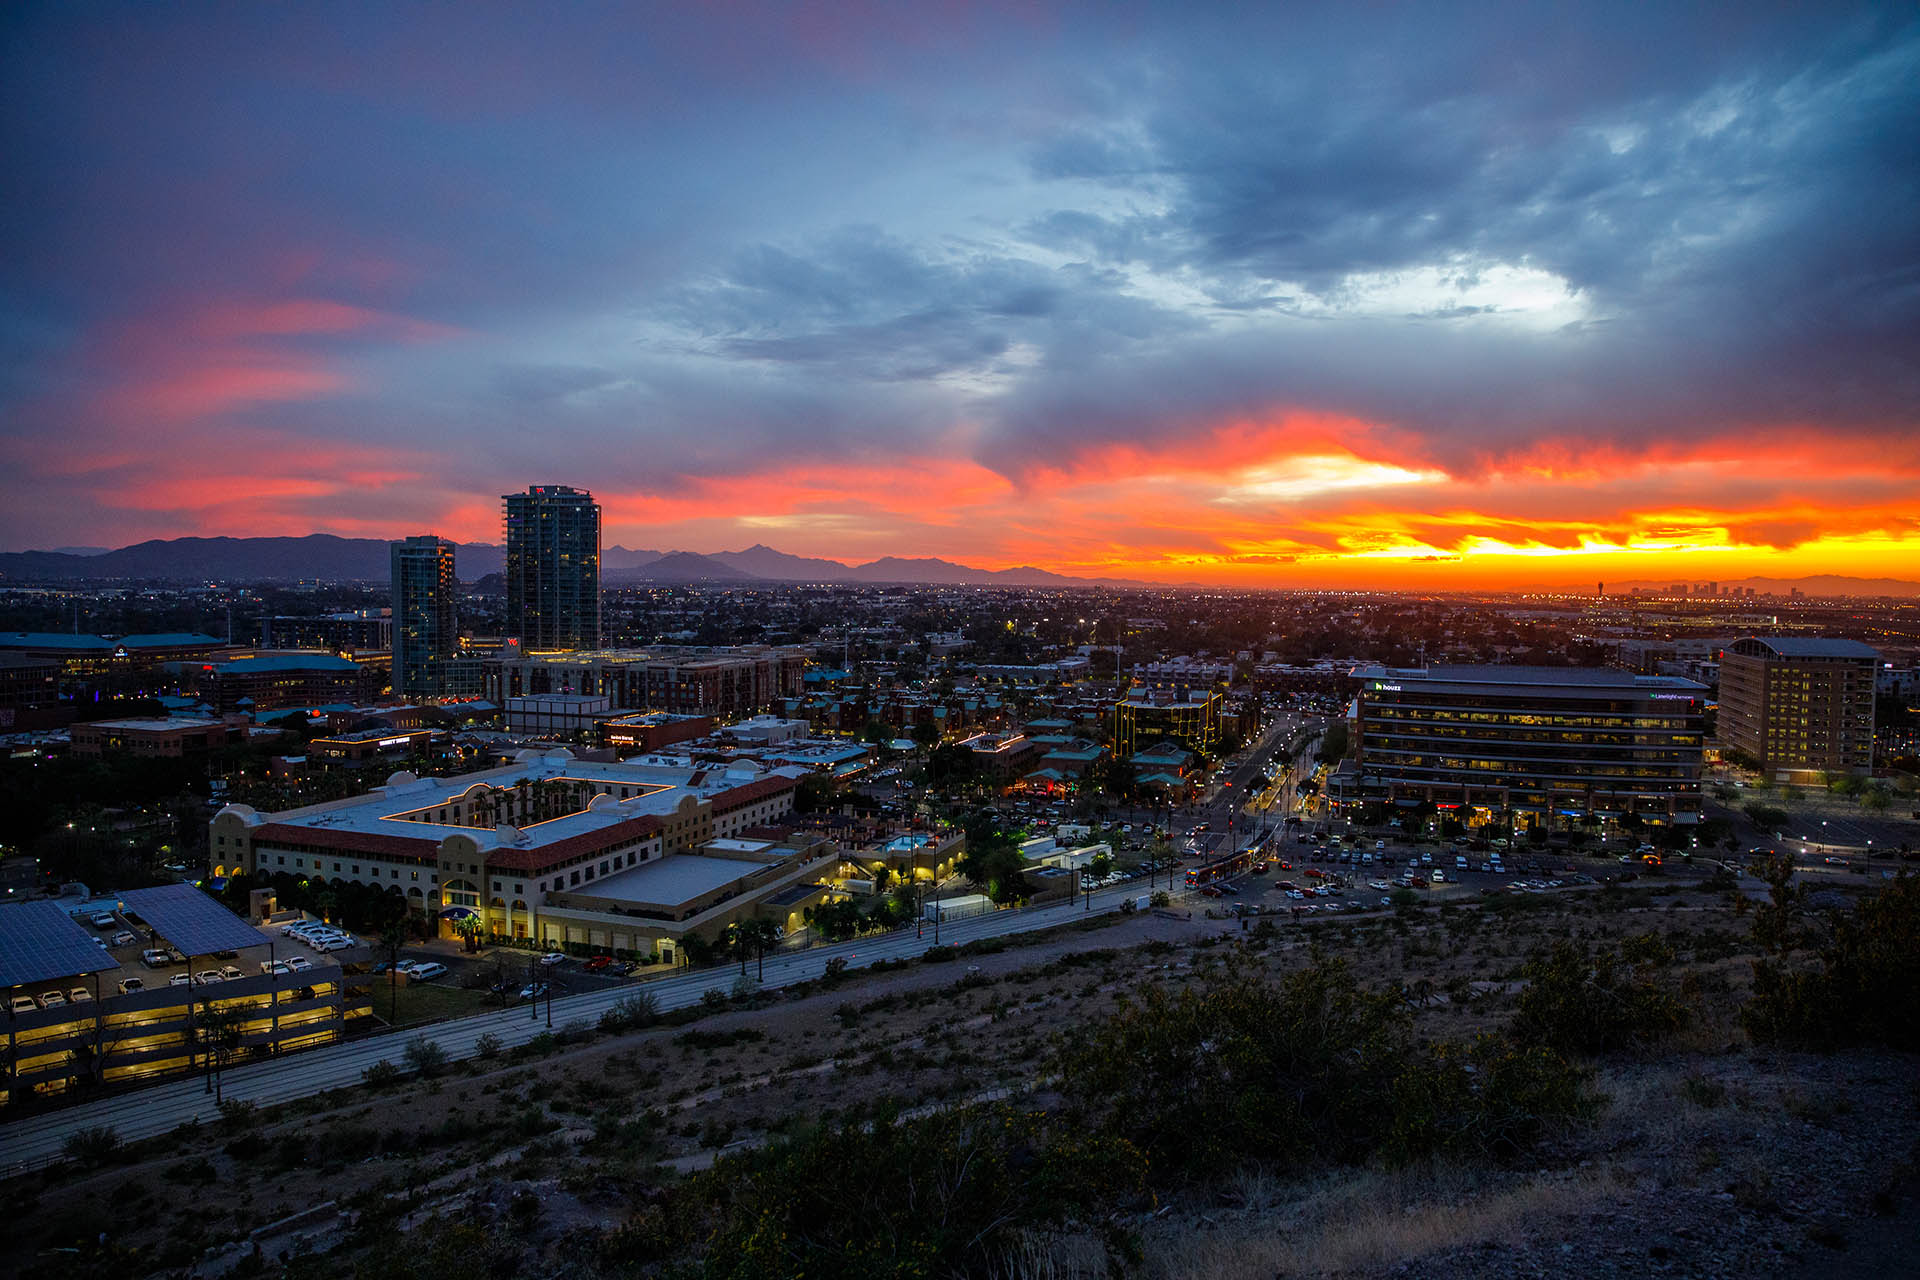 Arizona energy providers, state universities join forces to pursue a carbon-neutral economy